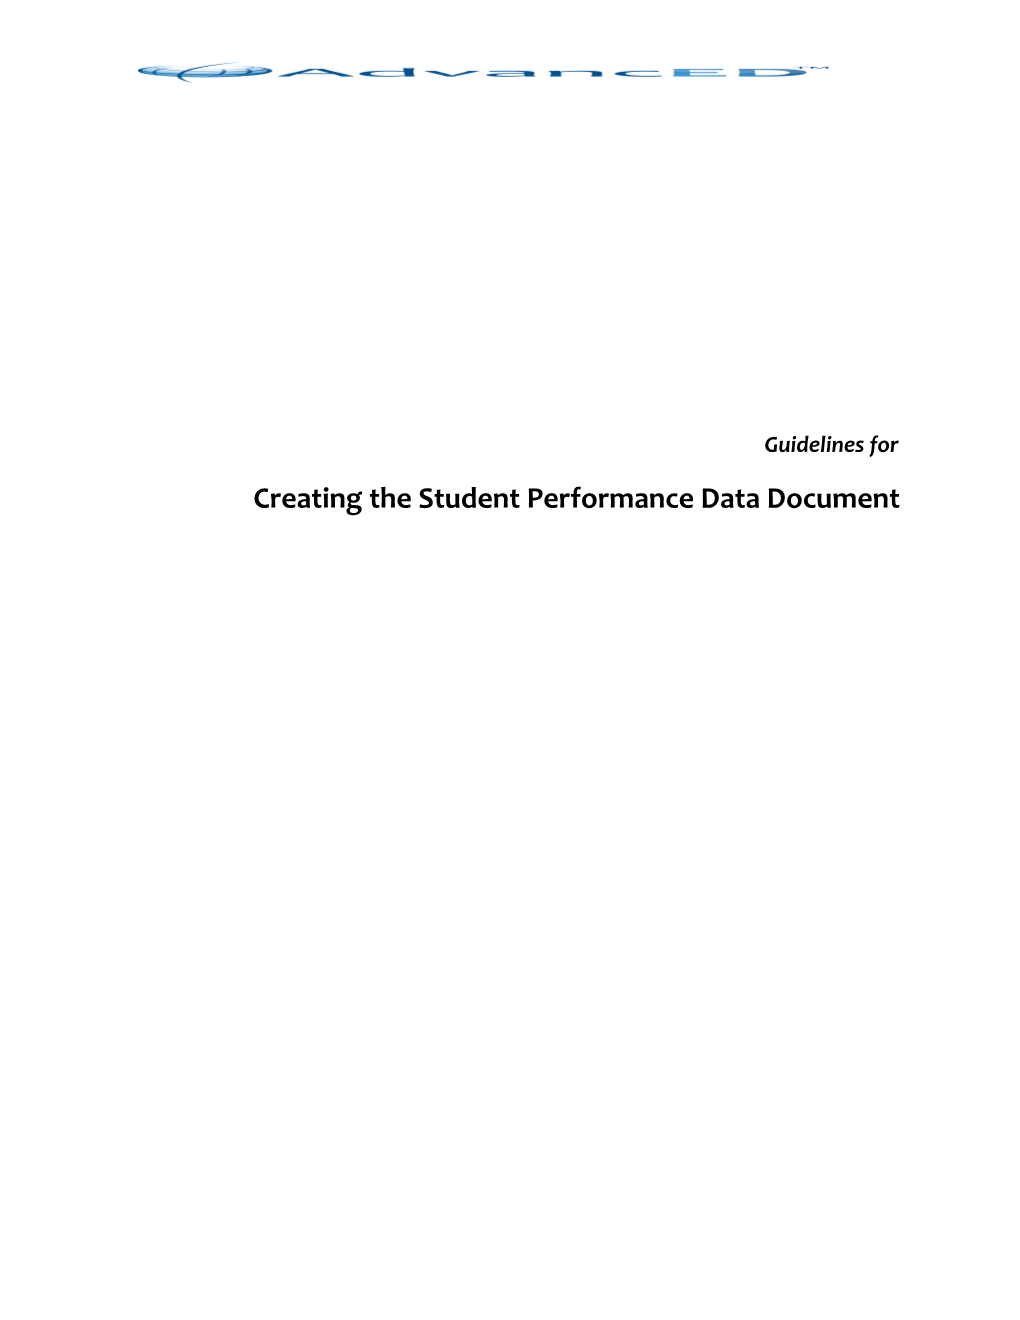 Creating the Student Performance Data Document